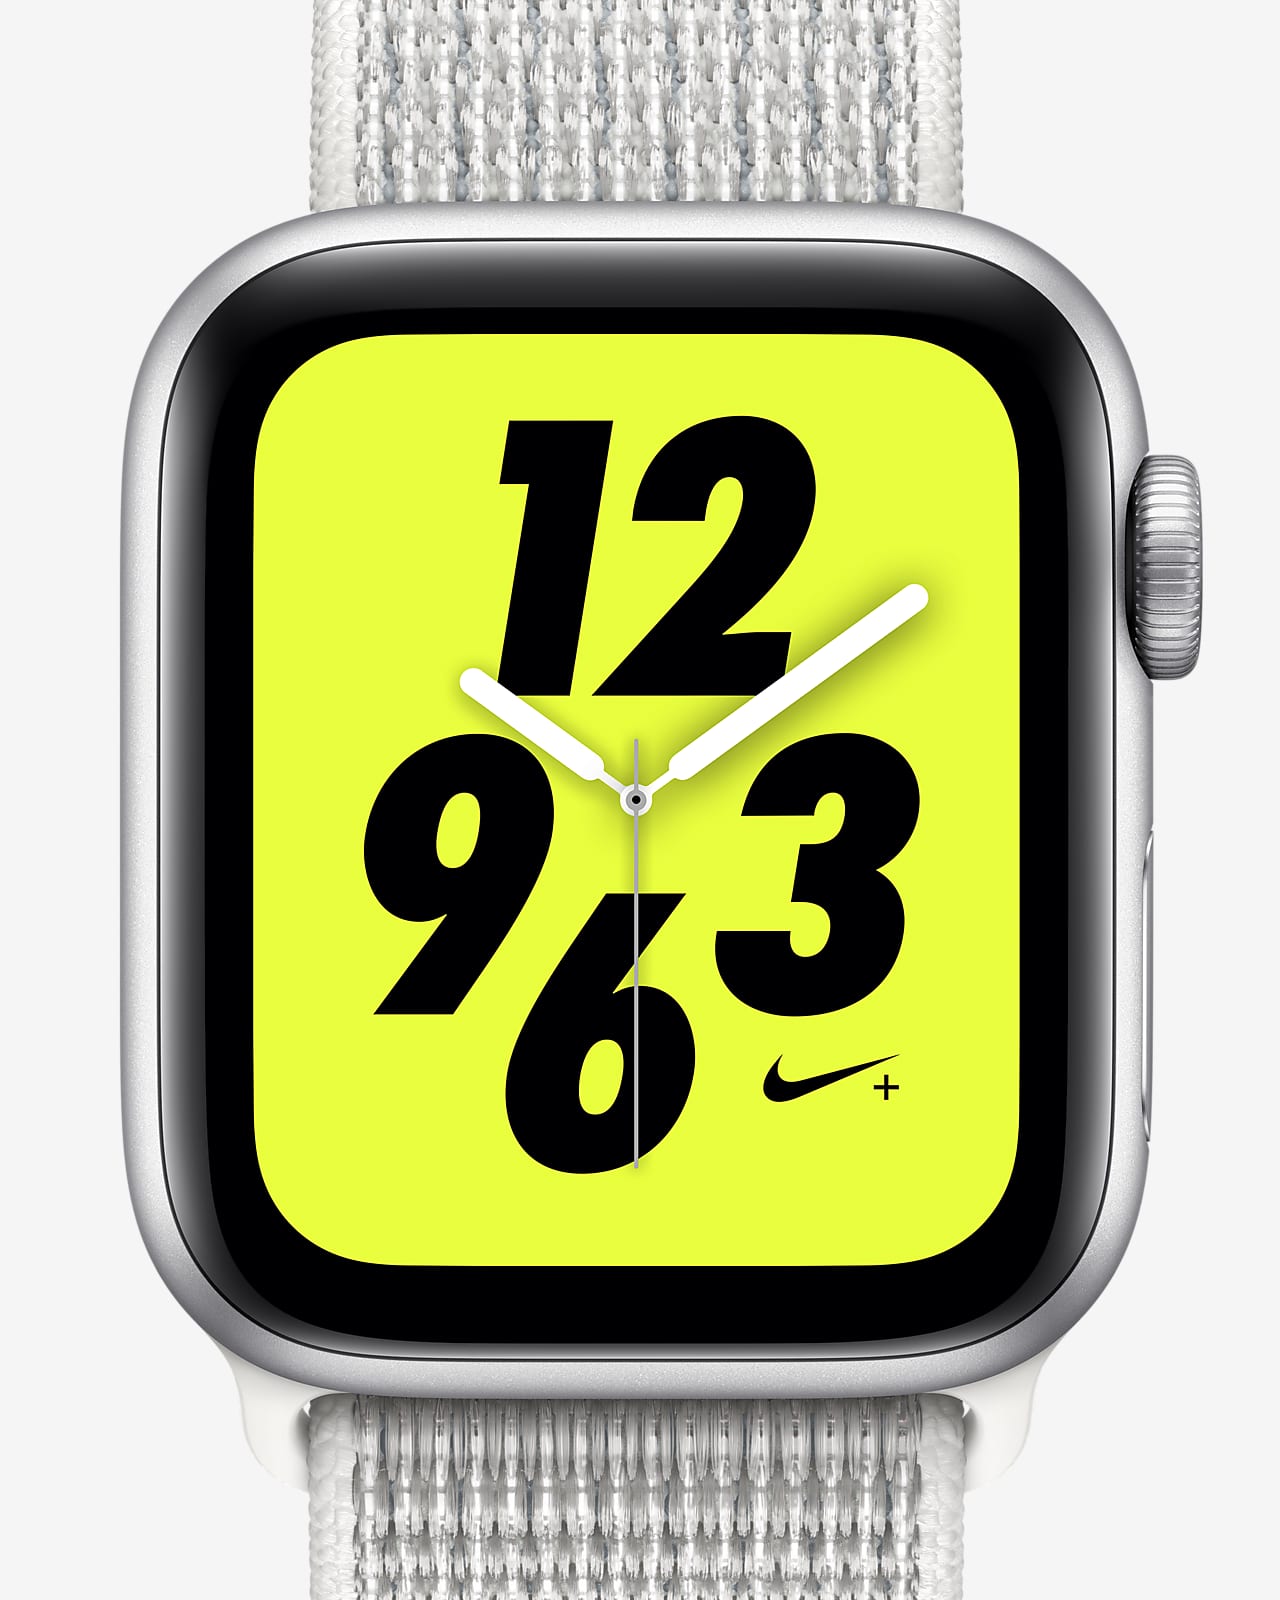 Jony Ive Ordered Boxes Full of Nike Watches in the Mid-2000s - MacRumors